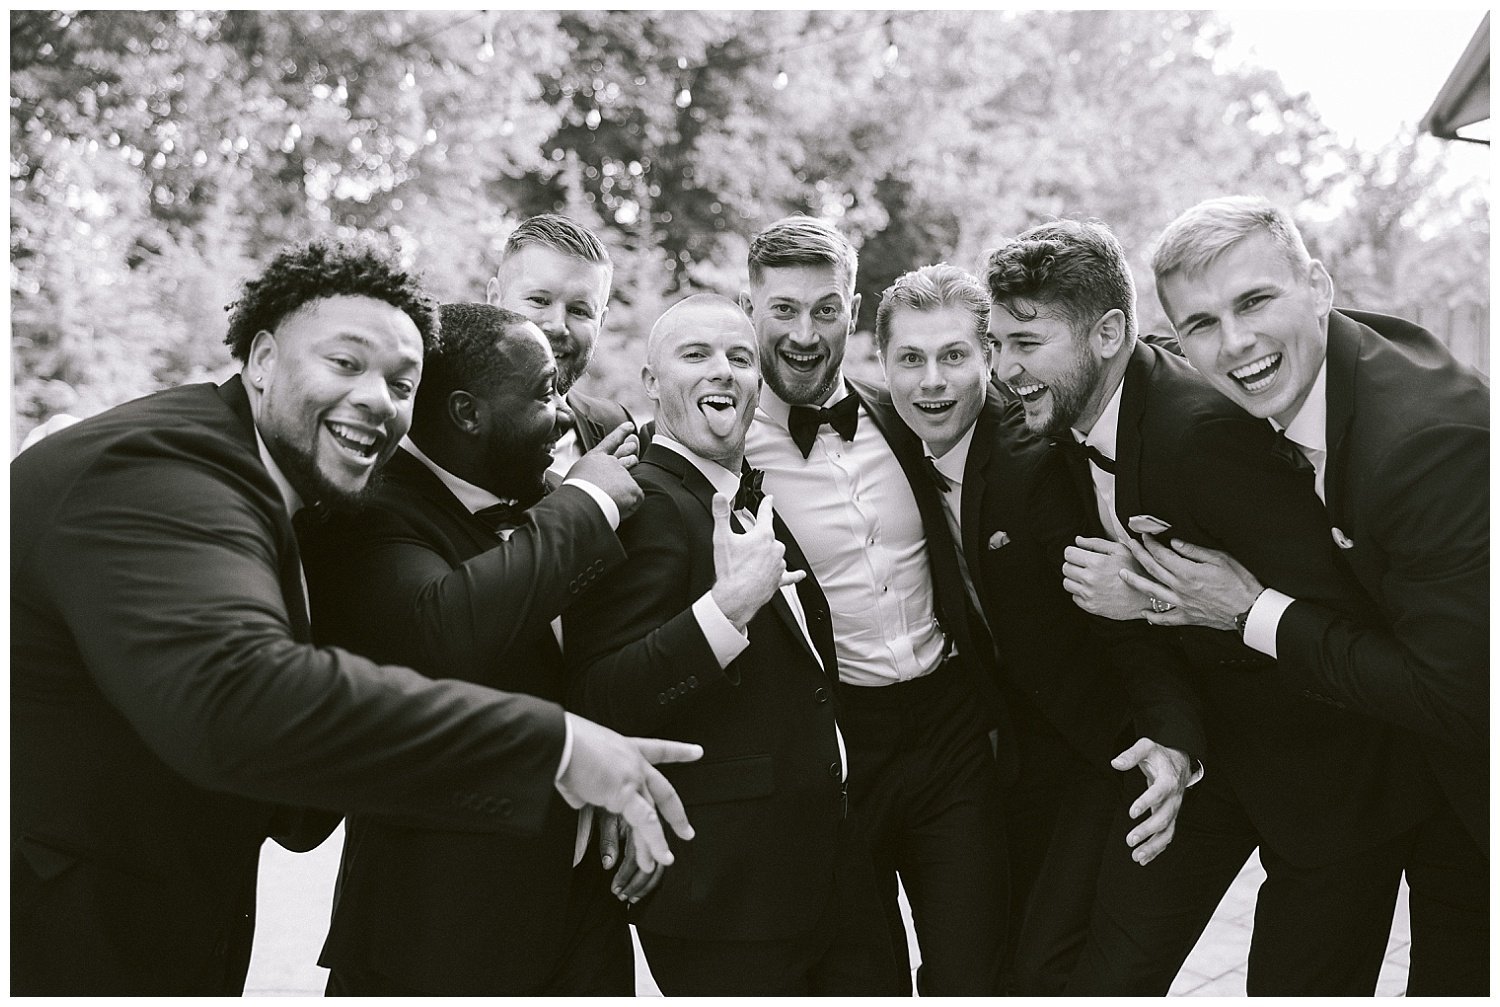 A photo of a groom and groomsmen hugging.